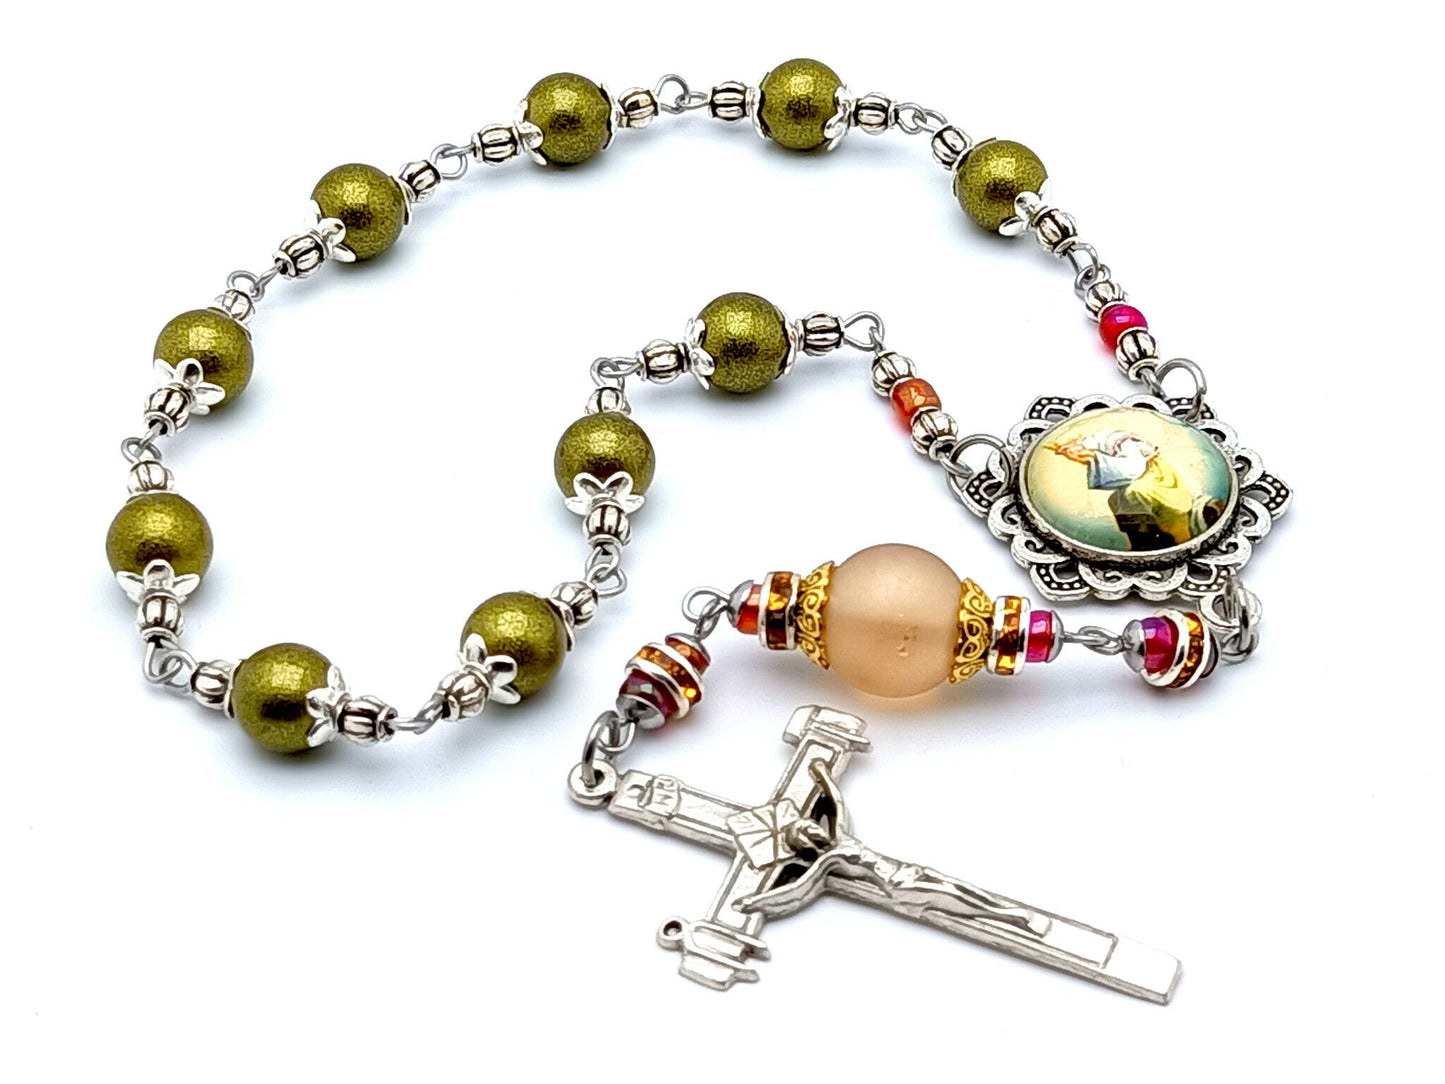 Our Lady of La Salette unique rosary beads single decade rosary with green and peach glass beads, silver La Salette crucifix and picture centre medal.